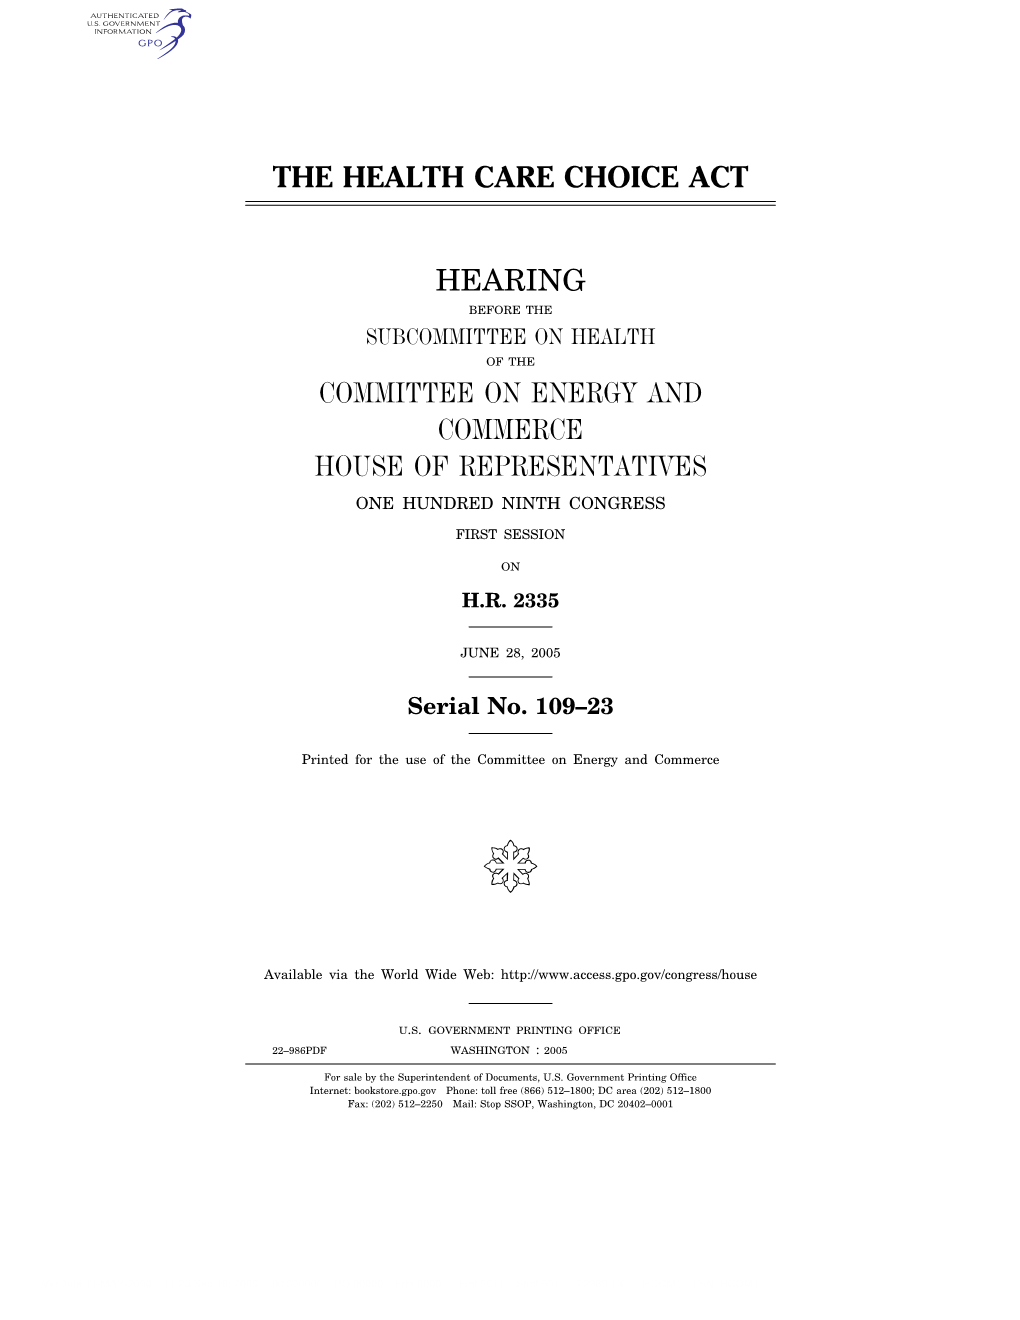 The Health Care Choice Act Hearing Committee on Energy and Commerce House of Representatives